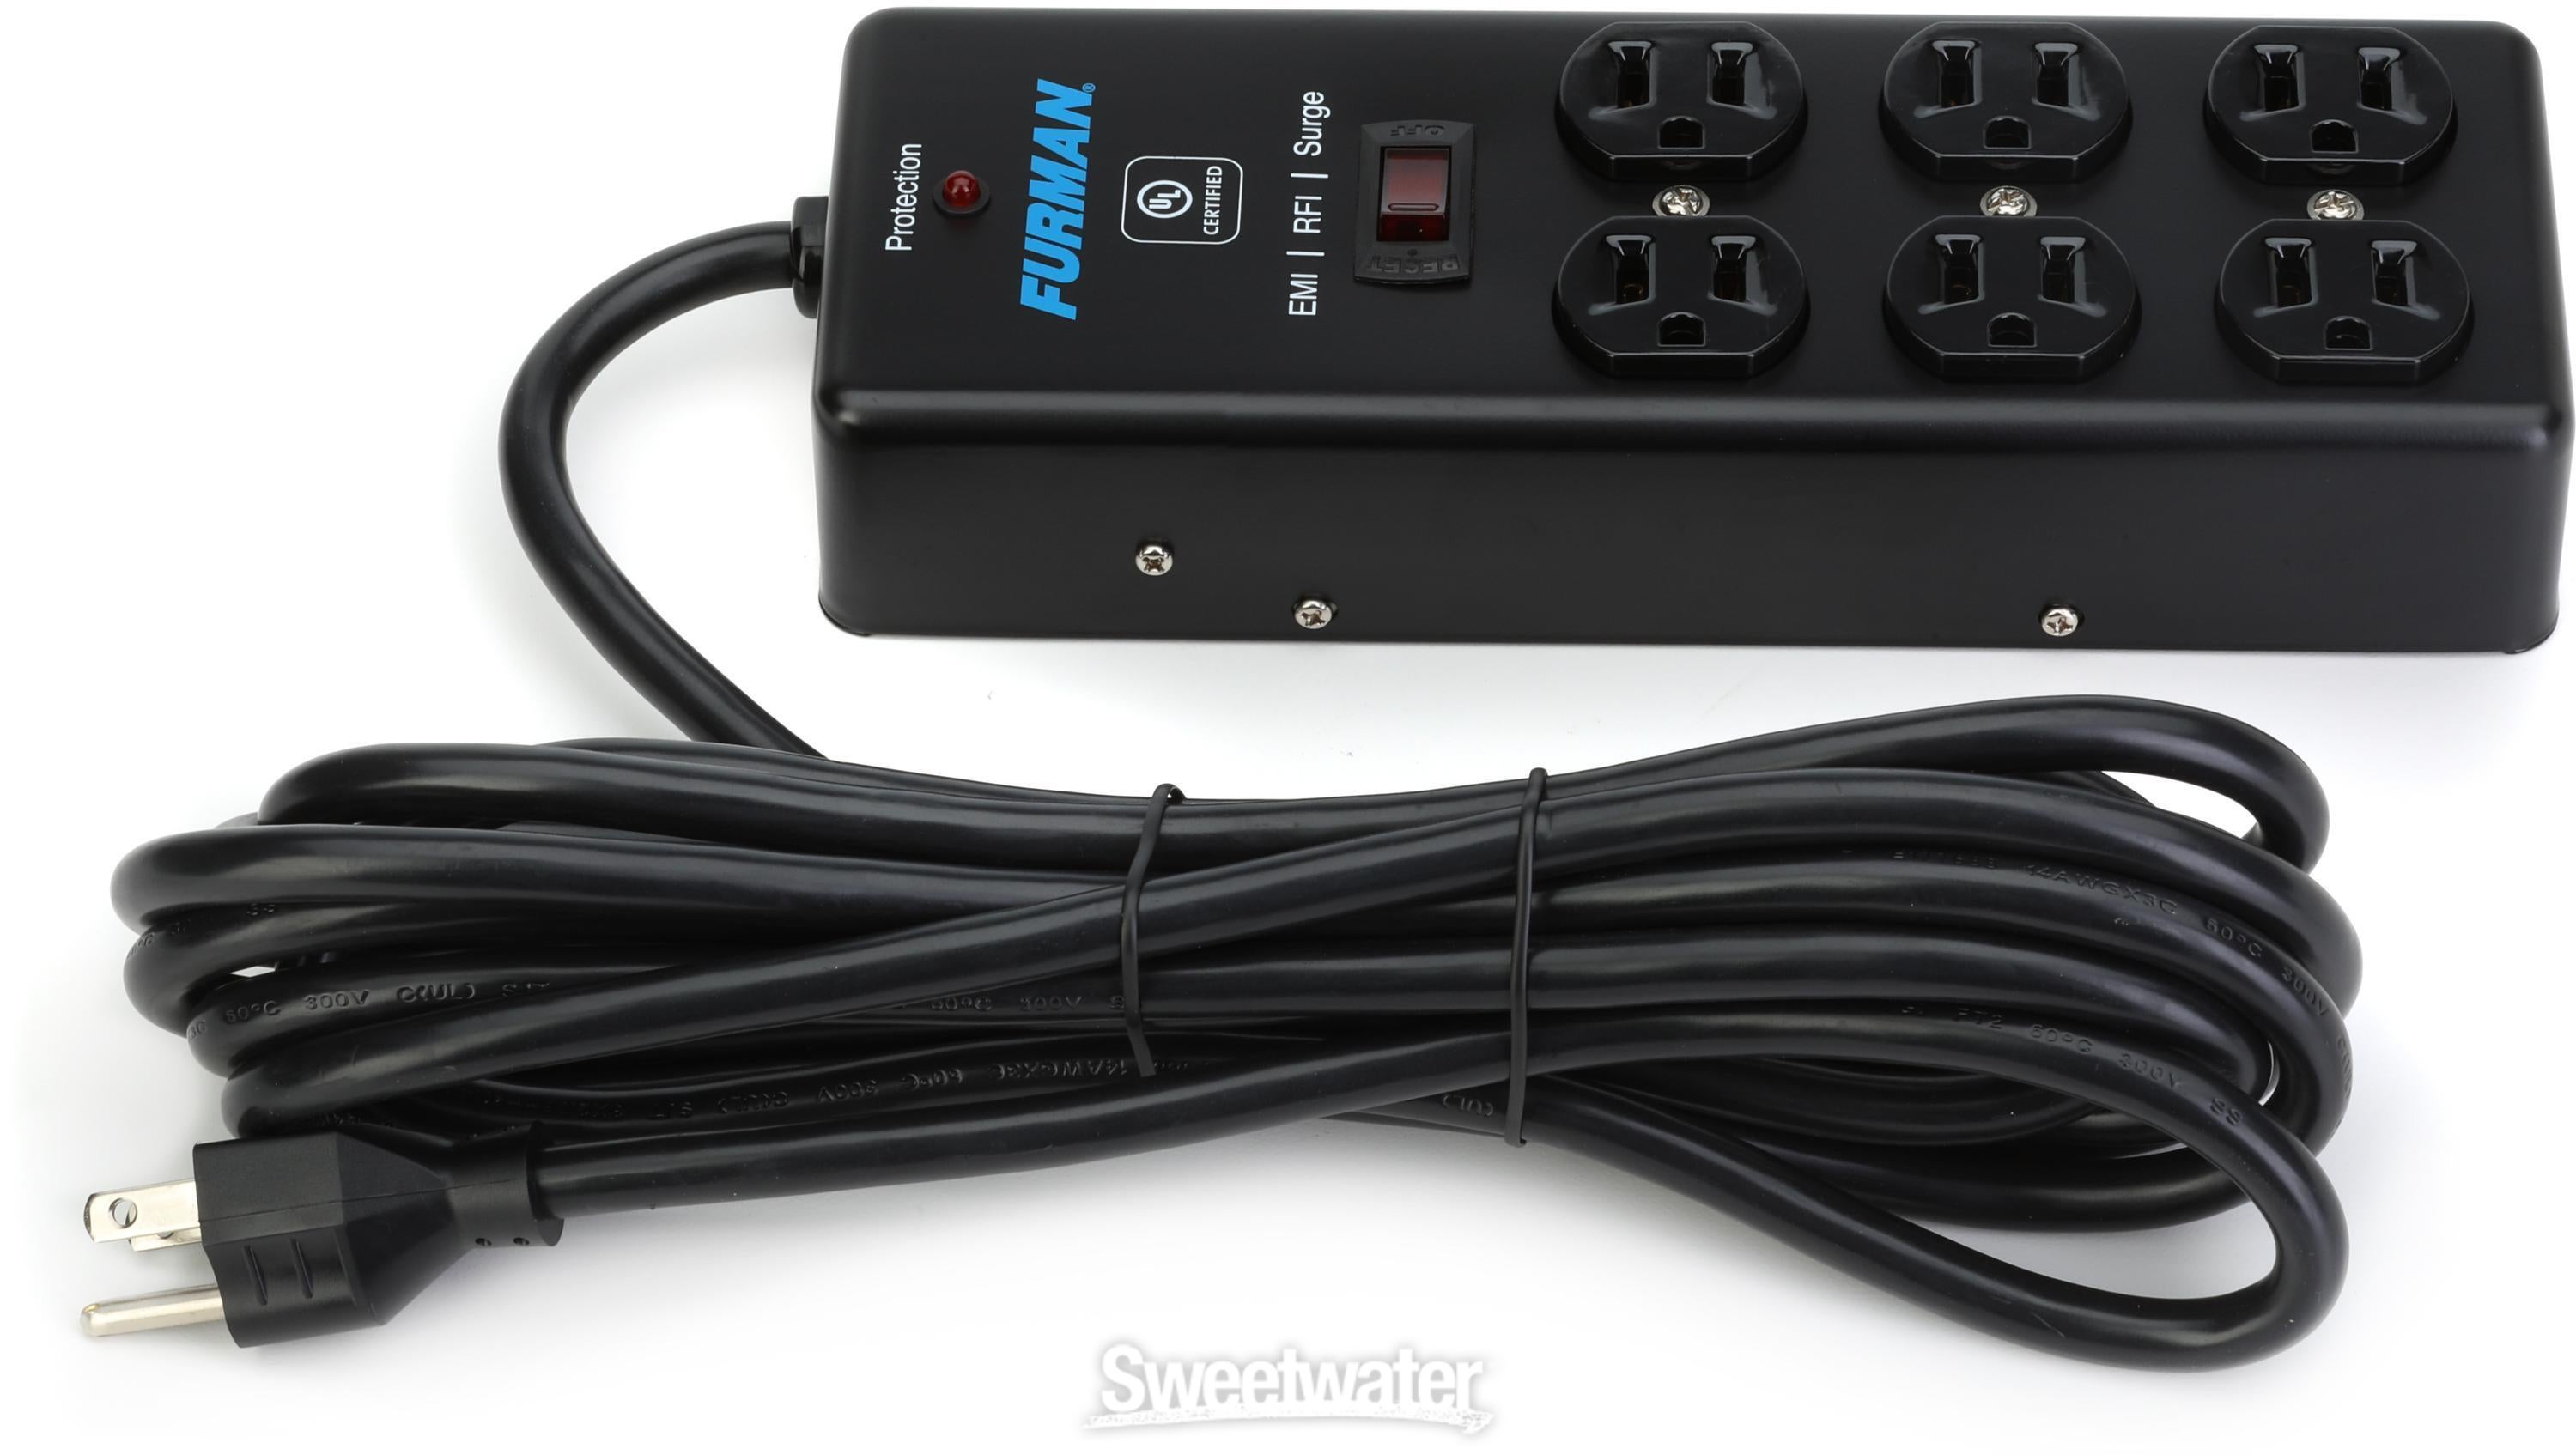 Furman SS-6B 6-outlet Surge Suppressor Strip (2-pack) | Sweetwater